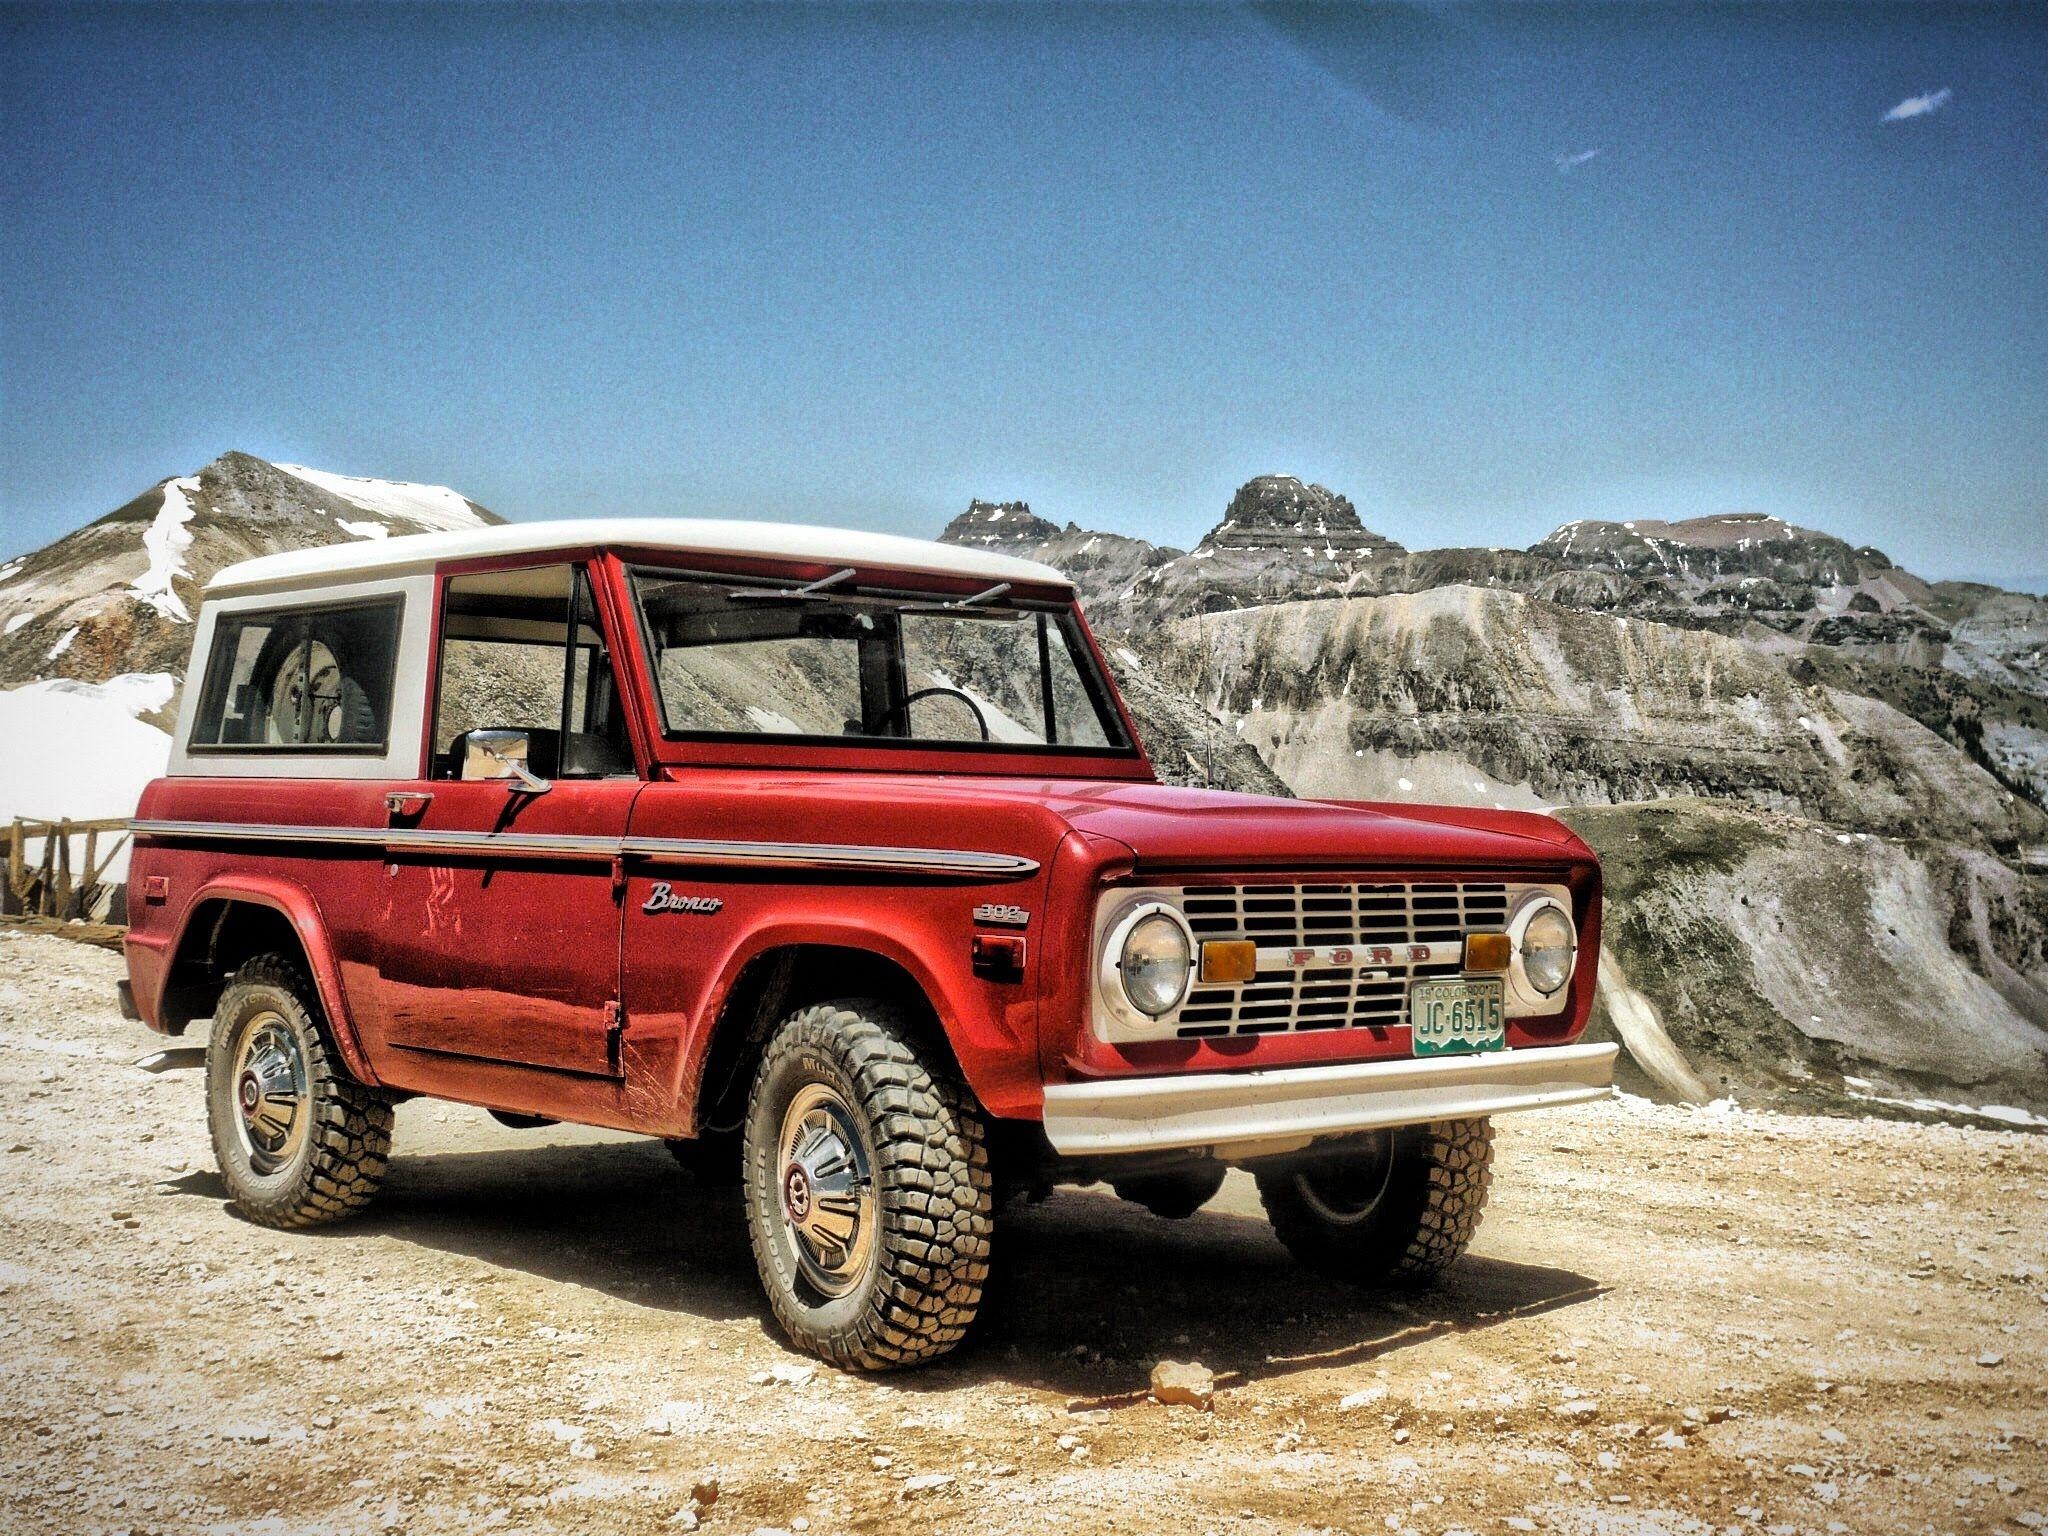 Ford Bronco: One Of The Best American Cars For Tourism, Classic Model, 1970, All-terrainer. 2050x1540 HD Background.